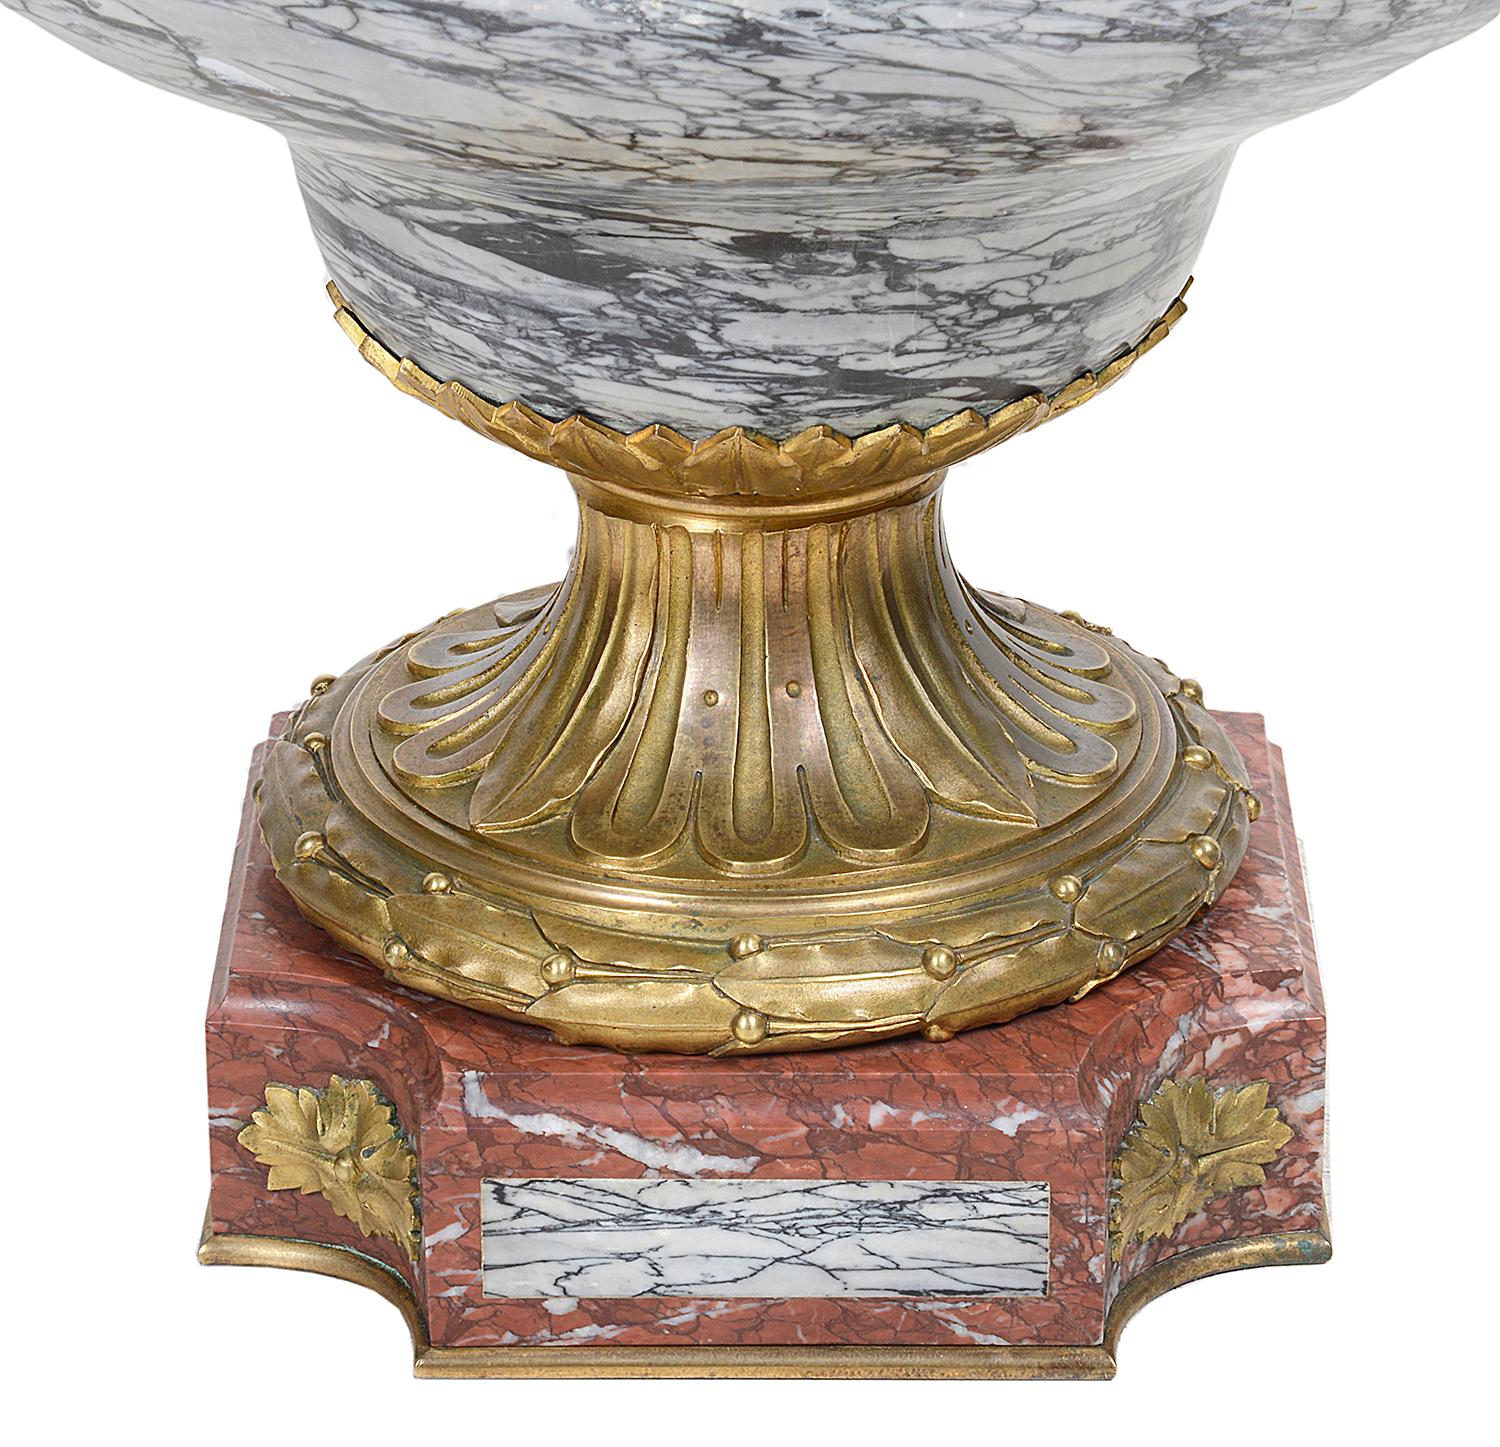 A very impressive 19th century veined grey marble lidded urn with wonderful gilded ormolu classical mounts of mythical dragon like handles and masks, raised on a fluted ormolu collar and rouge and grey marble plinth.
Signed E. Cornu (1827-1875).